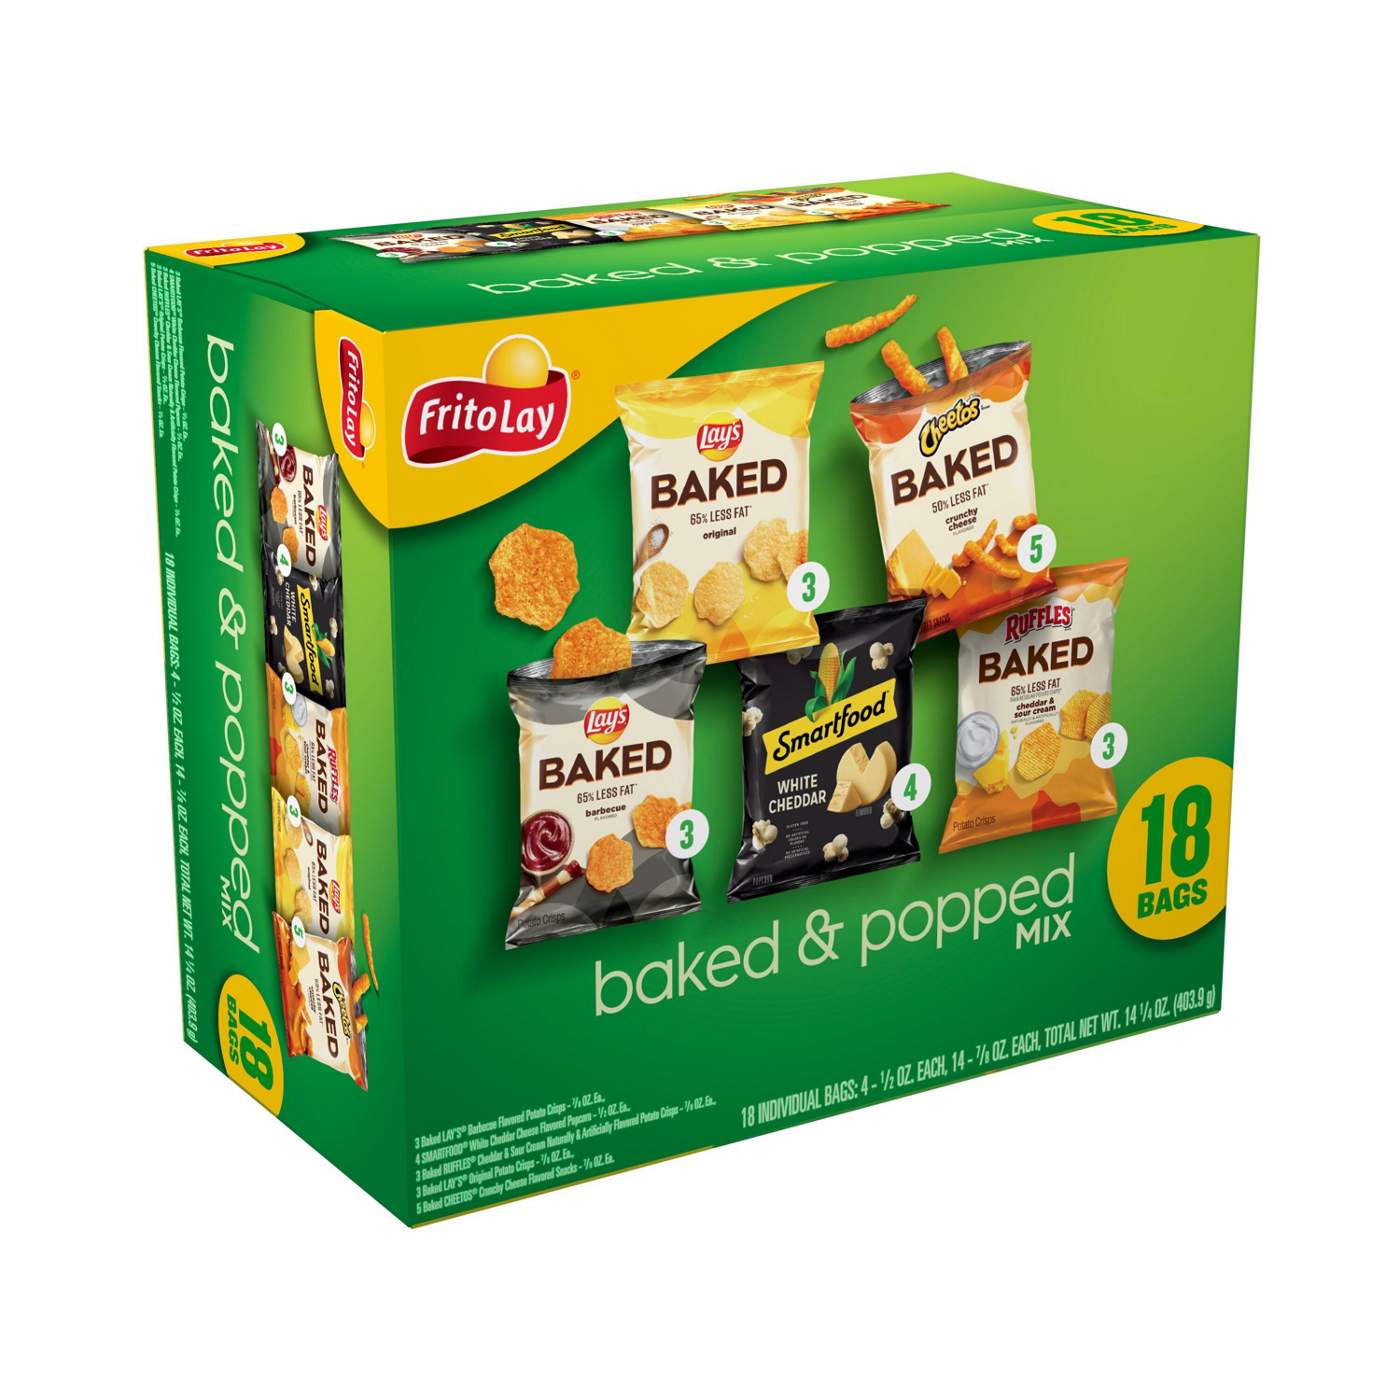 Frito Lay Baked & Popped Mix Variety Pack Chips; image 2 of 2